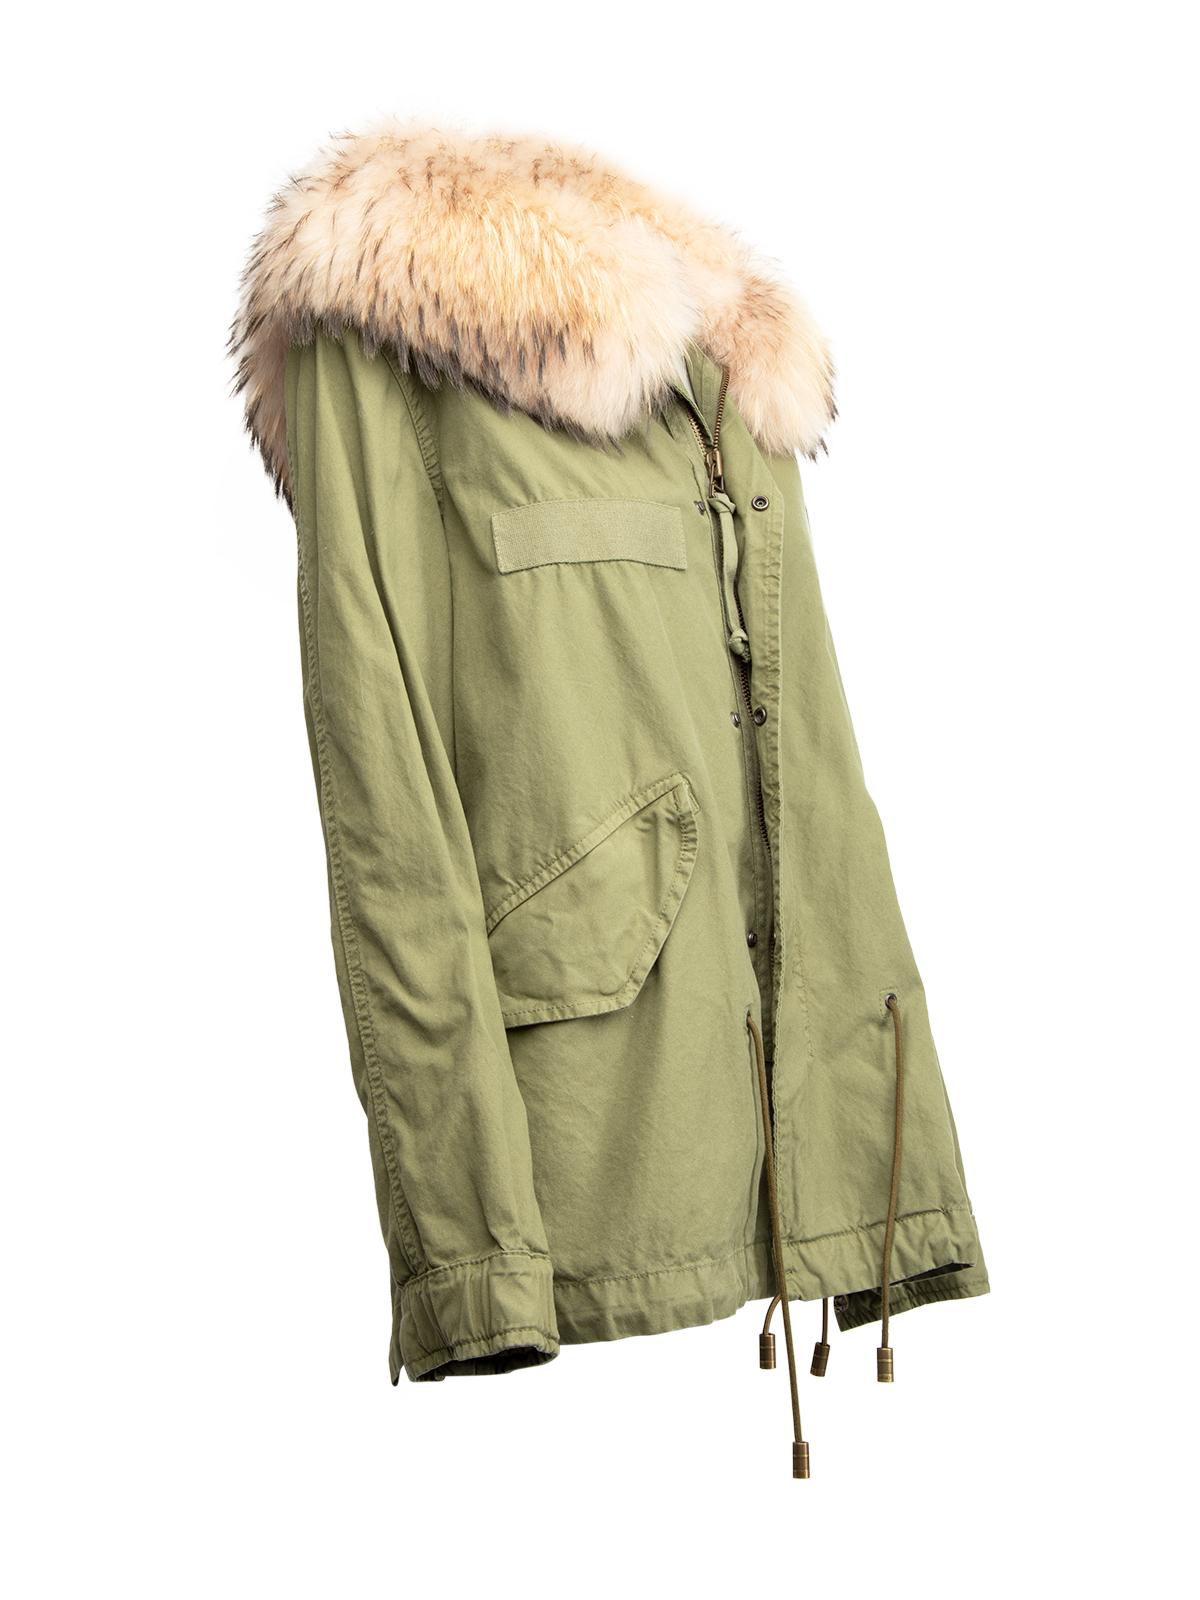 CONDITION is Very good. Hardly any visible wear to coat is evident on this used Mr and Mrs. Italy designer resale item. Details Green Cotton Zip fastening Hood Detachable fur hood Drawstring hem Pockets Comes in Original dust bag Composition